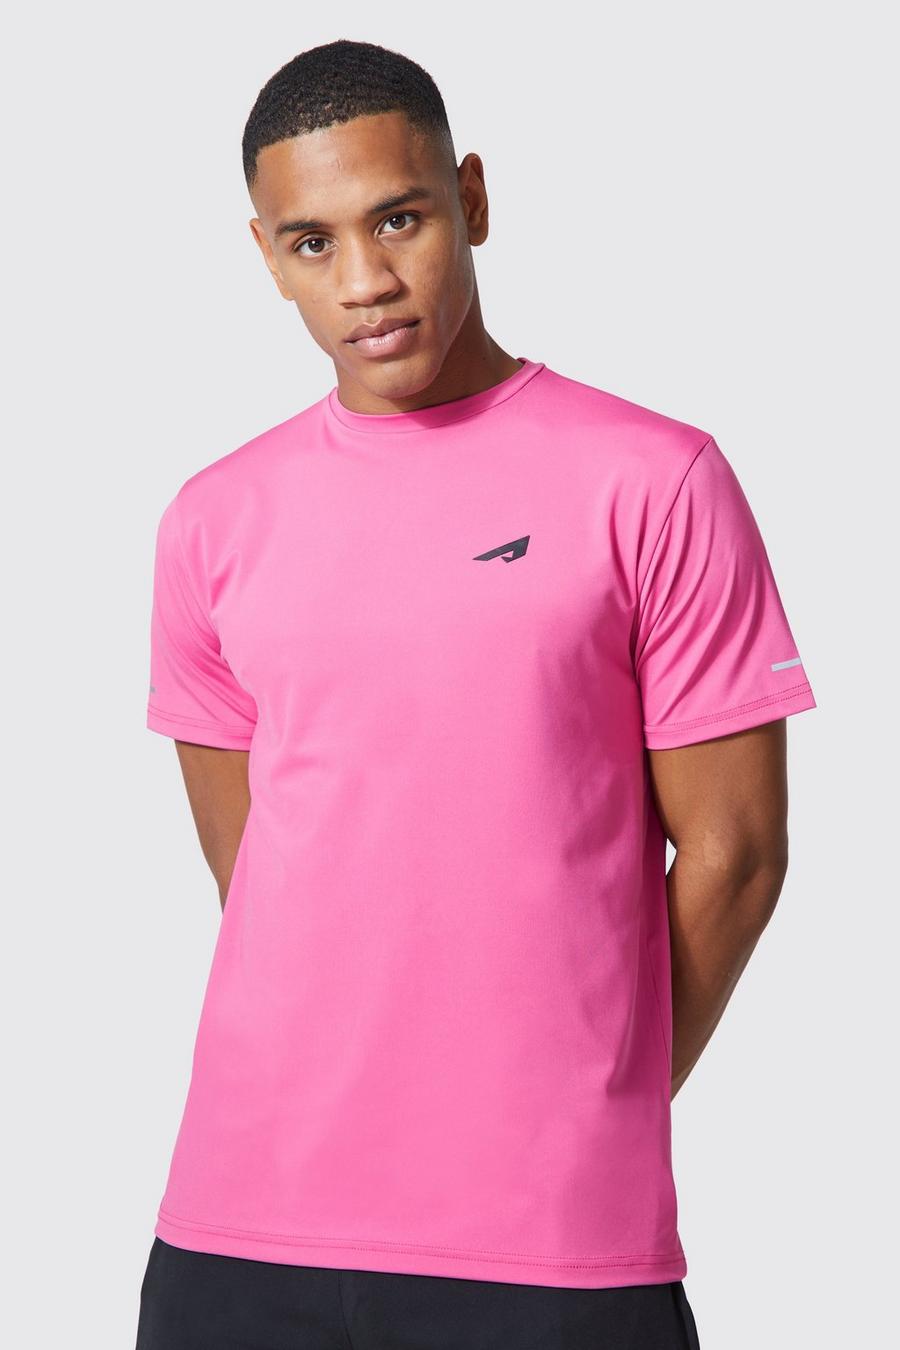 Performance T-Shirt mit Active Logo, Bright pink image number 1